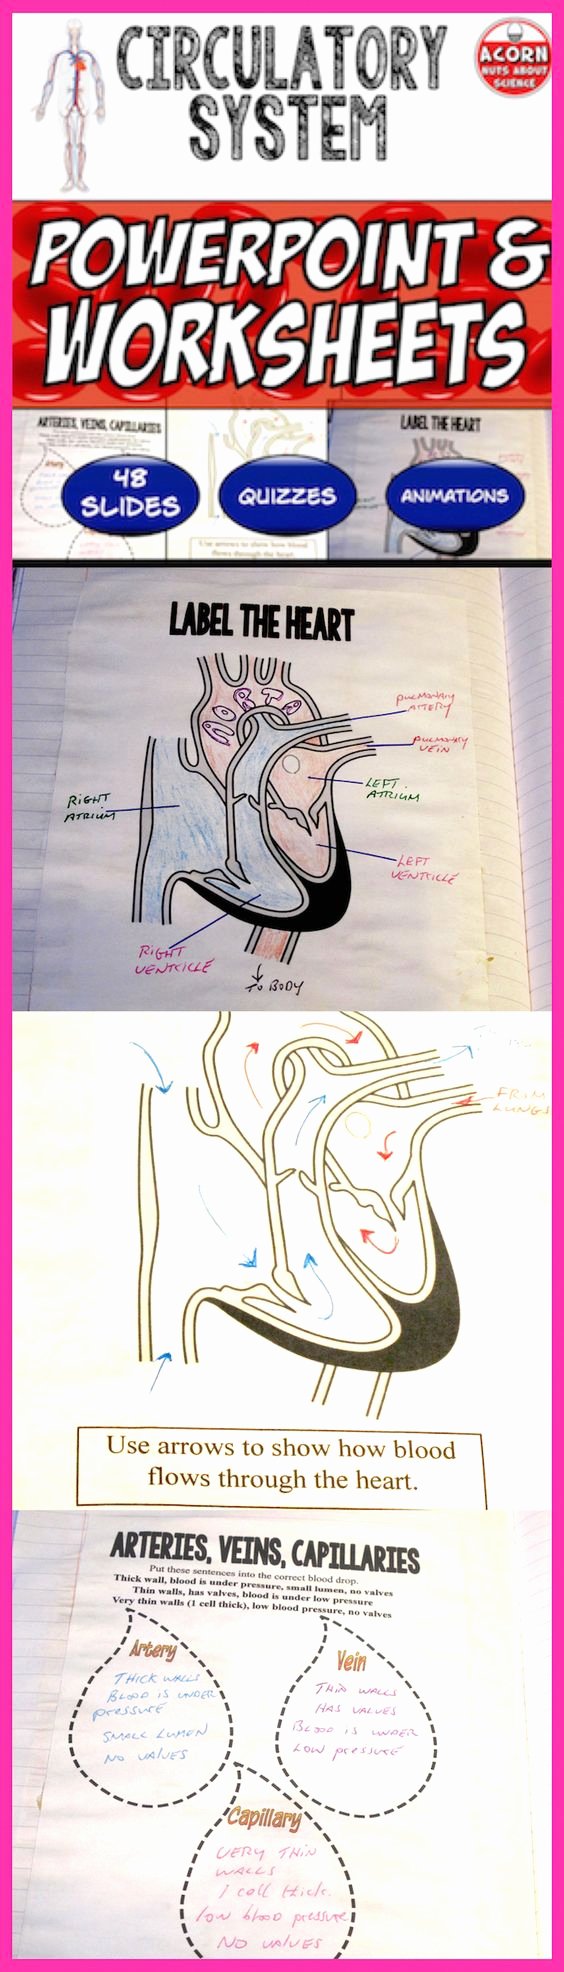 Circulatory System Worksheet Pdf Fresh Circulatory System Exit Tickets and Notebooks On Pinterest